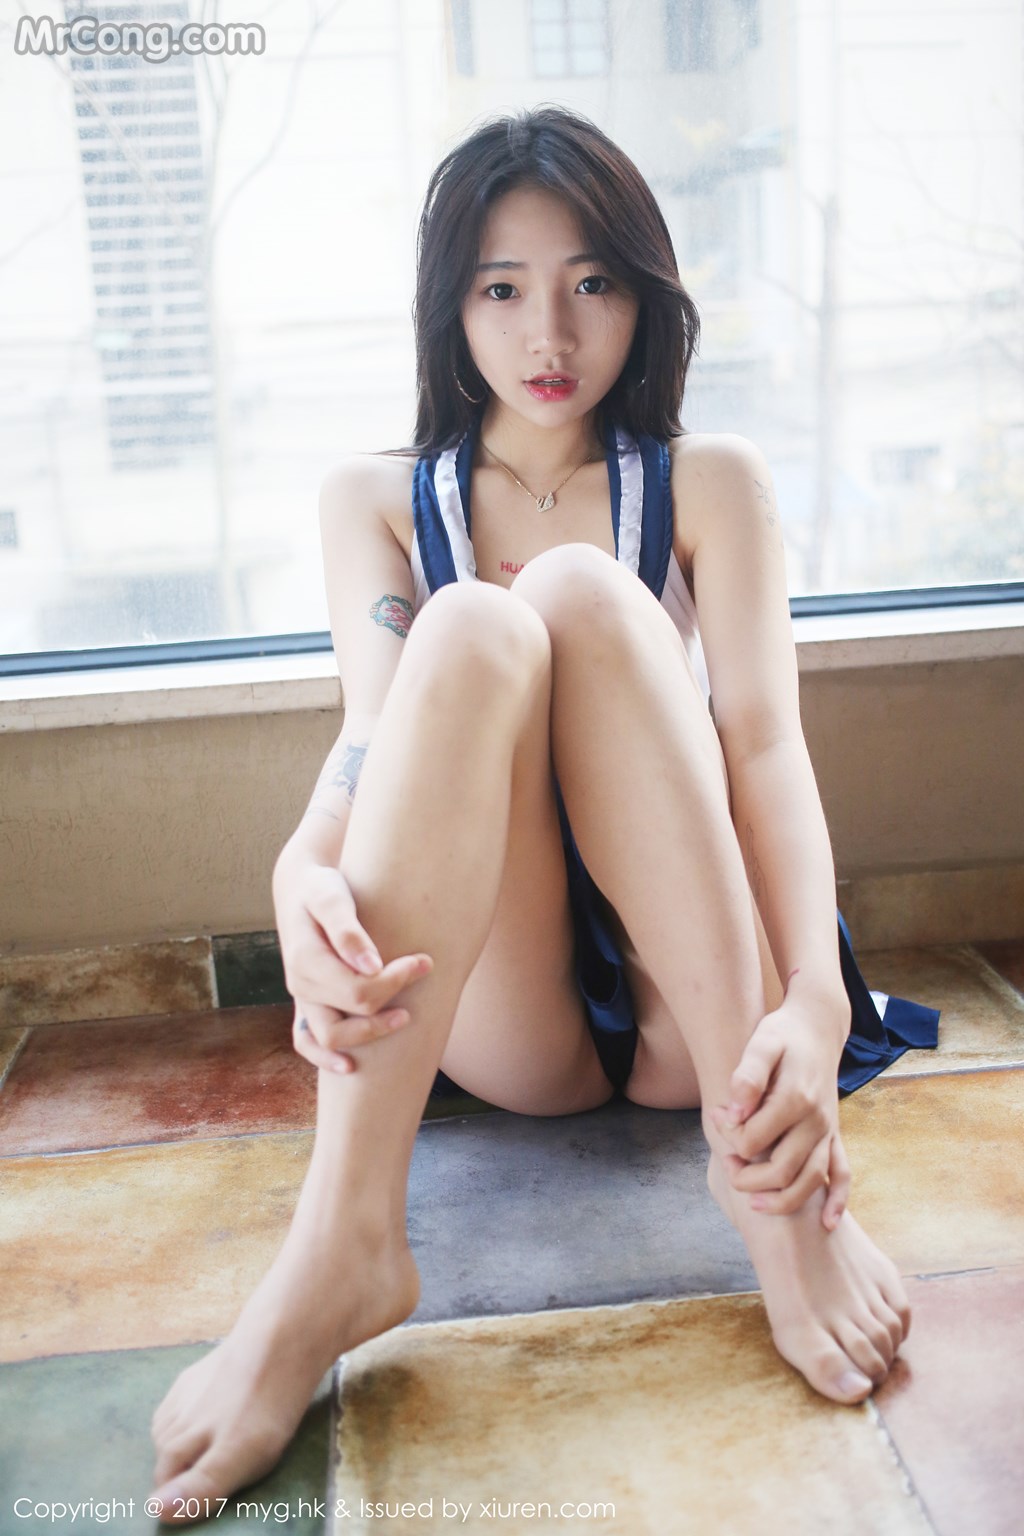 MyGirl Vol.249: Model Xiao Yue (小月 moon) (51 pictures) photo 2-9